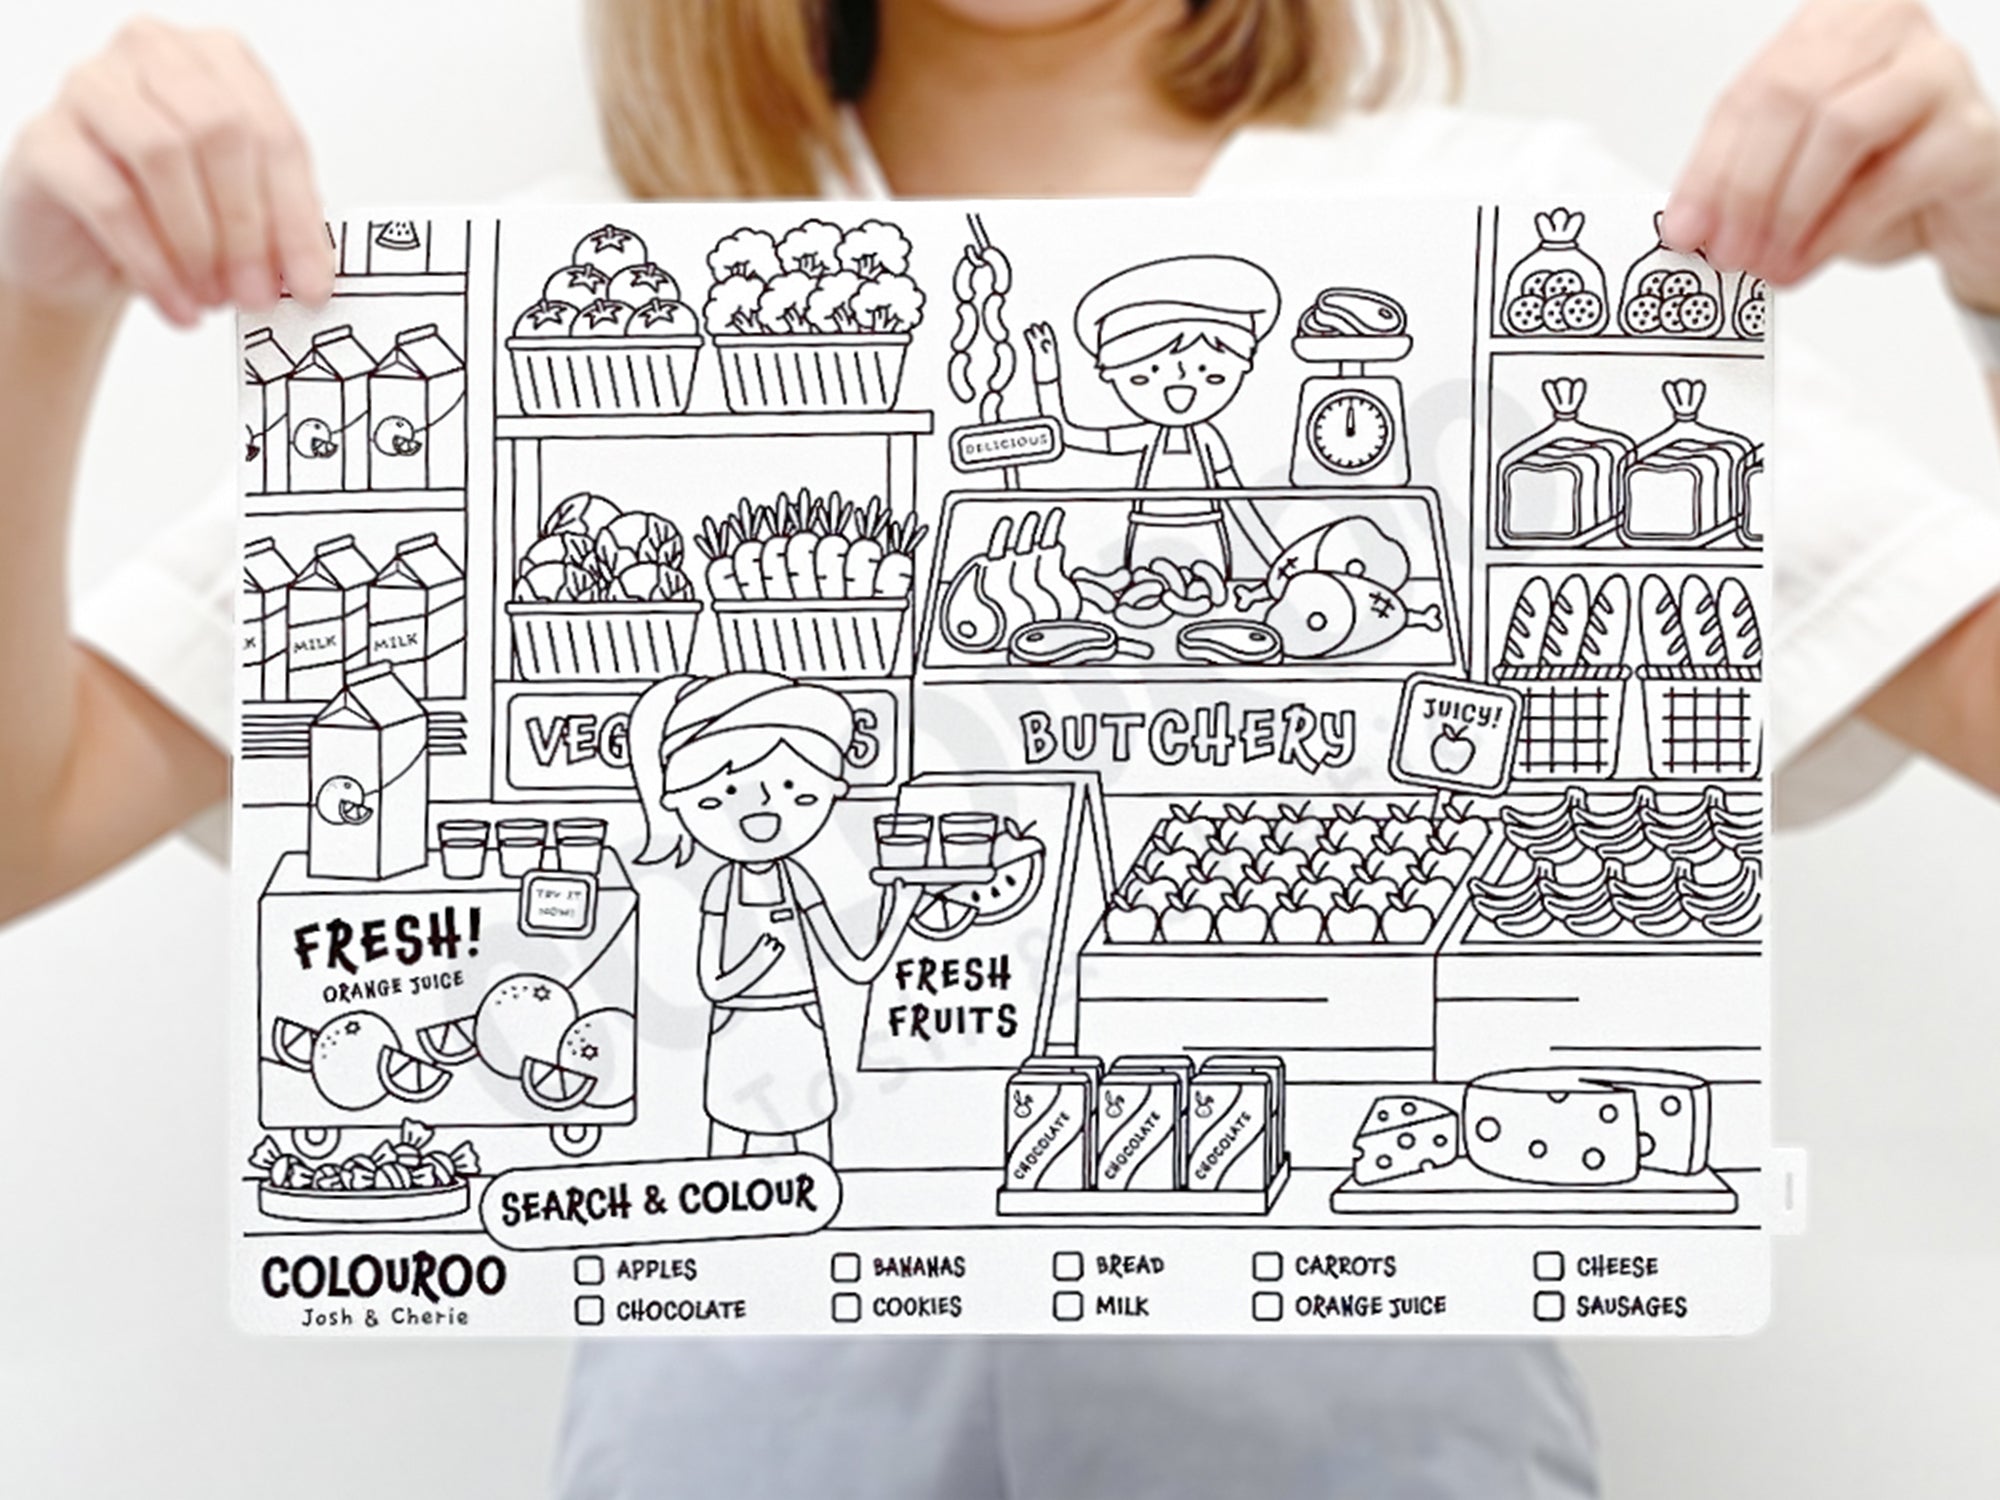 Grocery Store: Search & Colour Mat